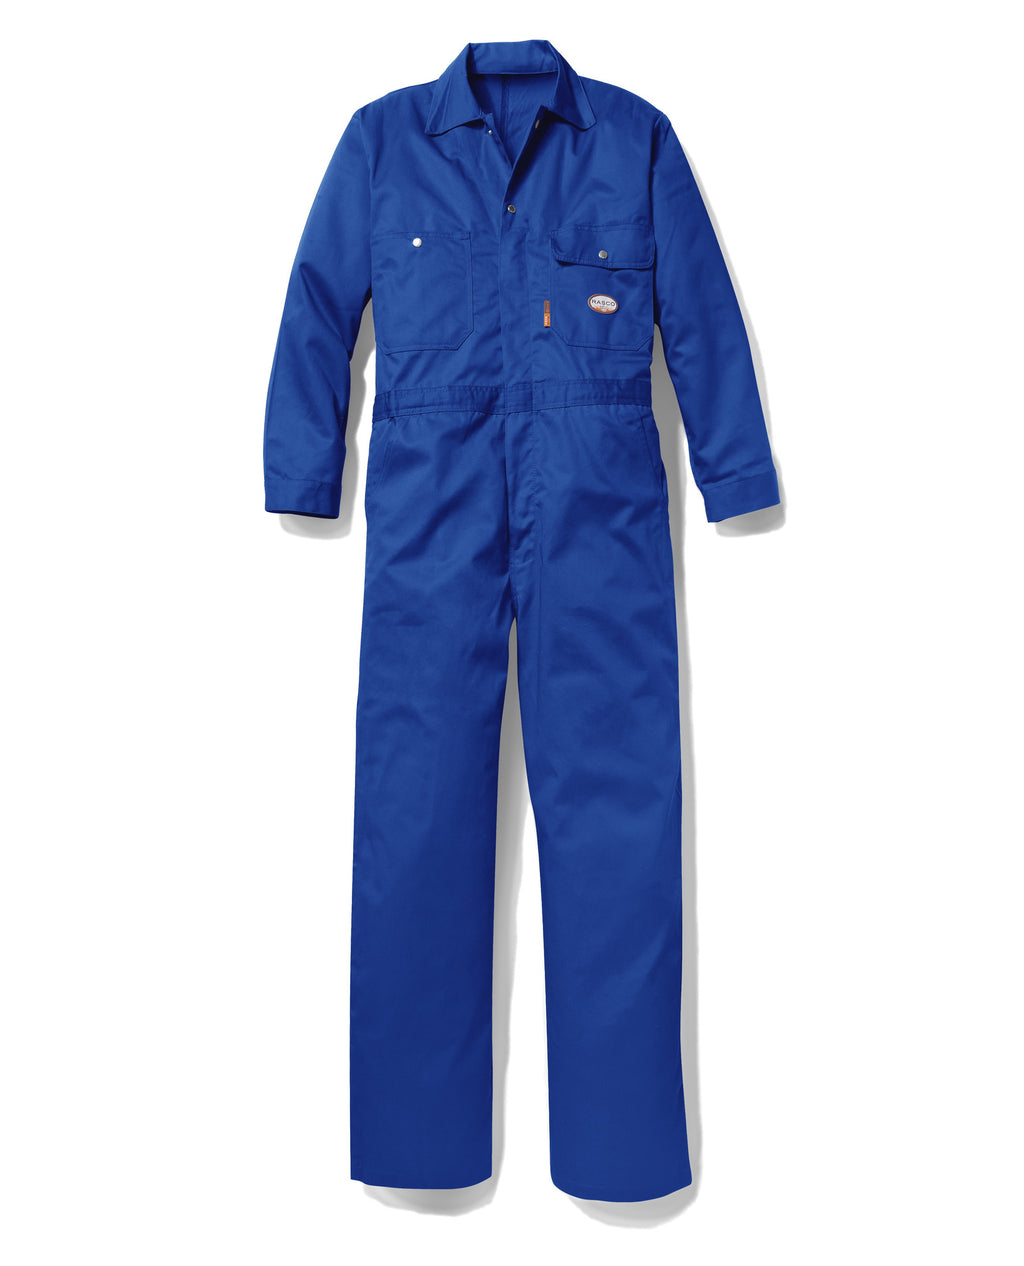 Rasco FR Lightweight Royal Blue DH Contractor Coveralls